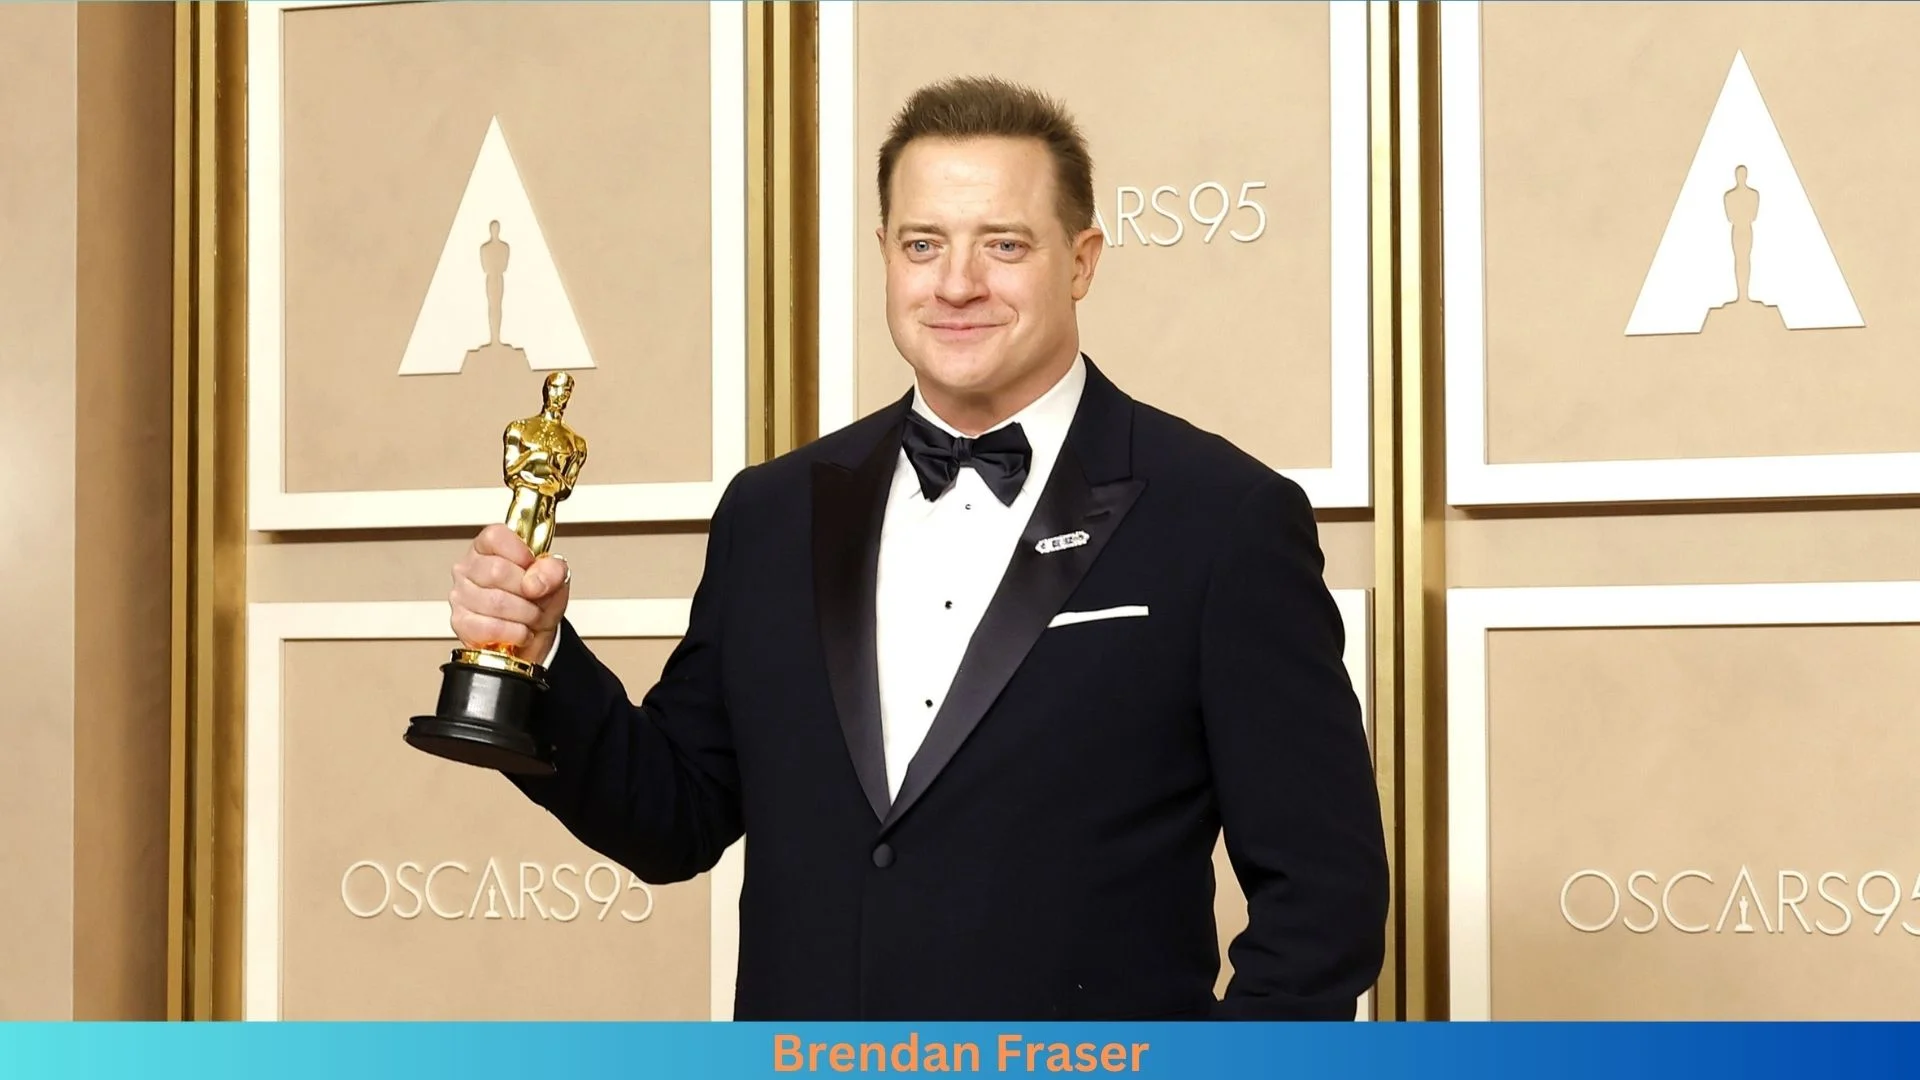 What is the net worth of Brendan Fraser